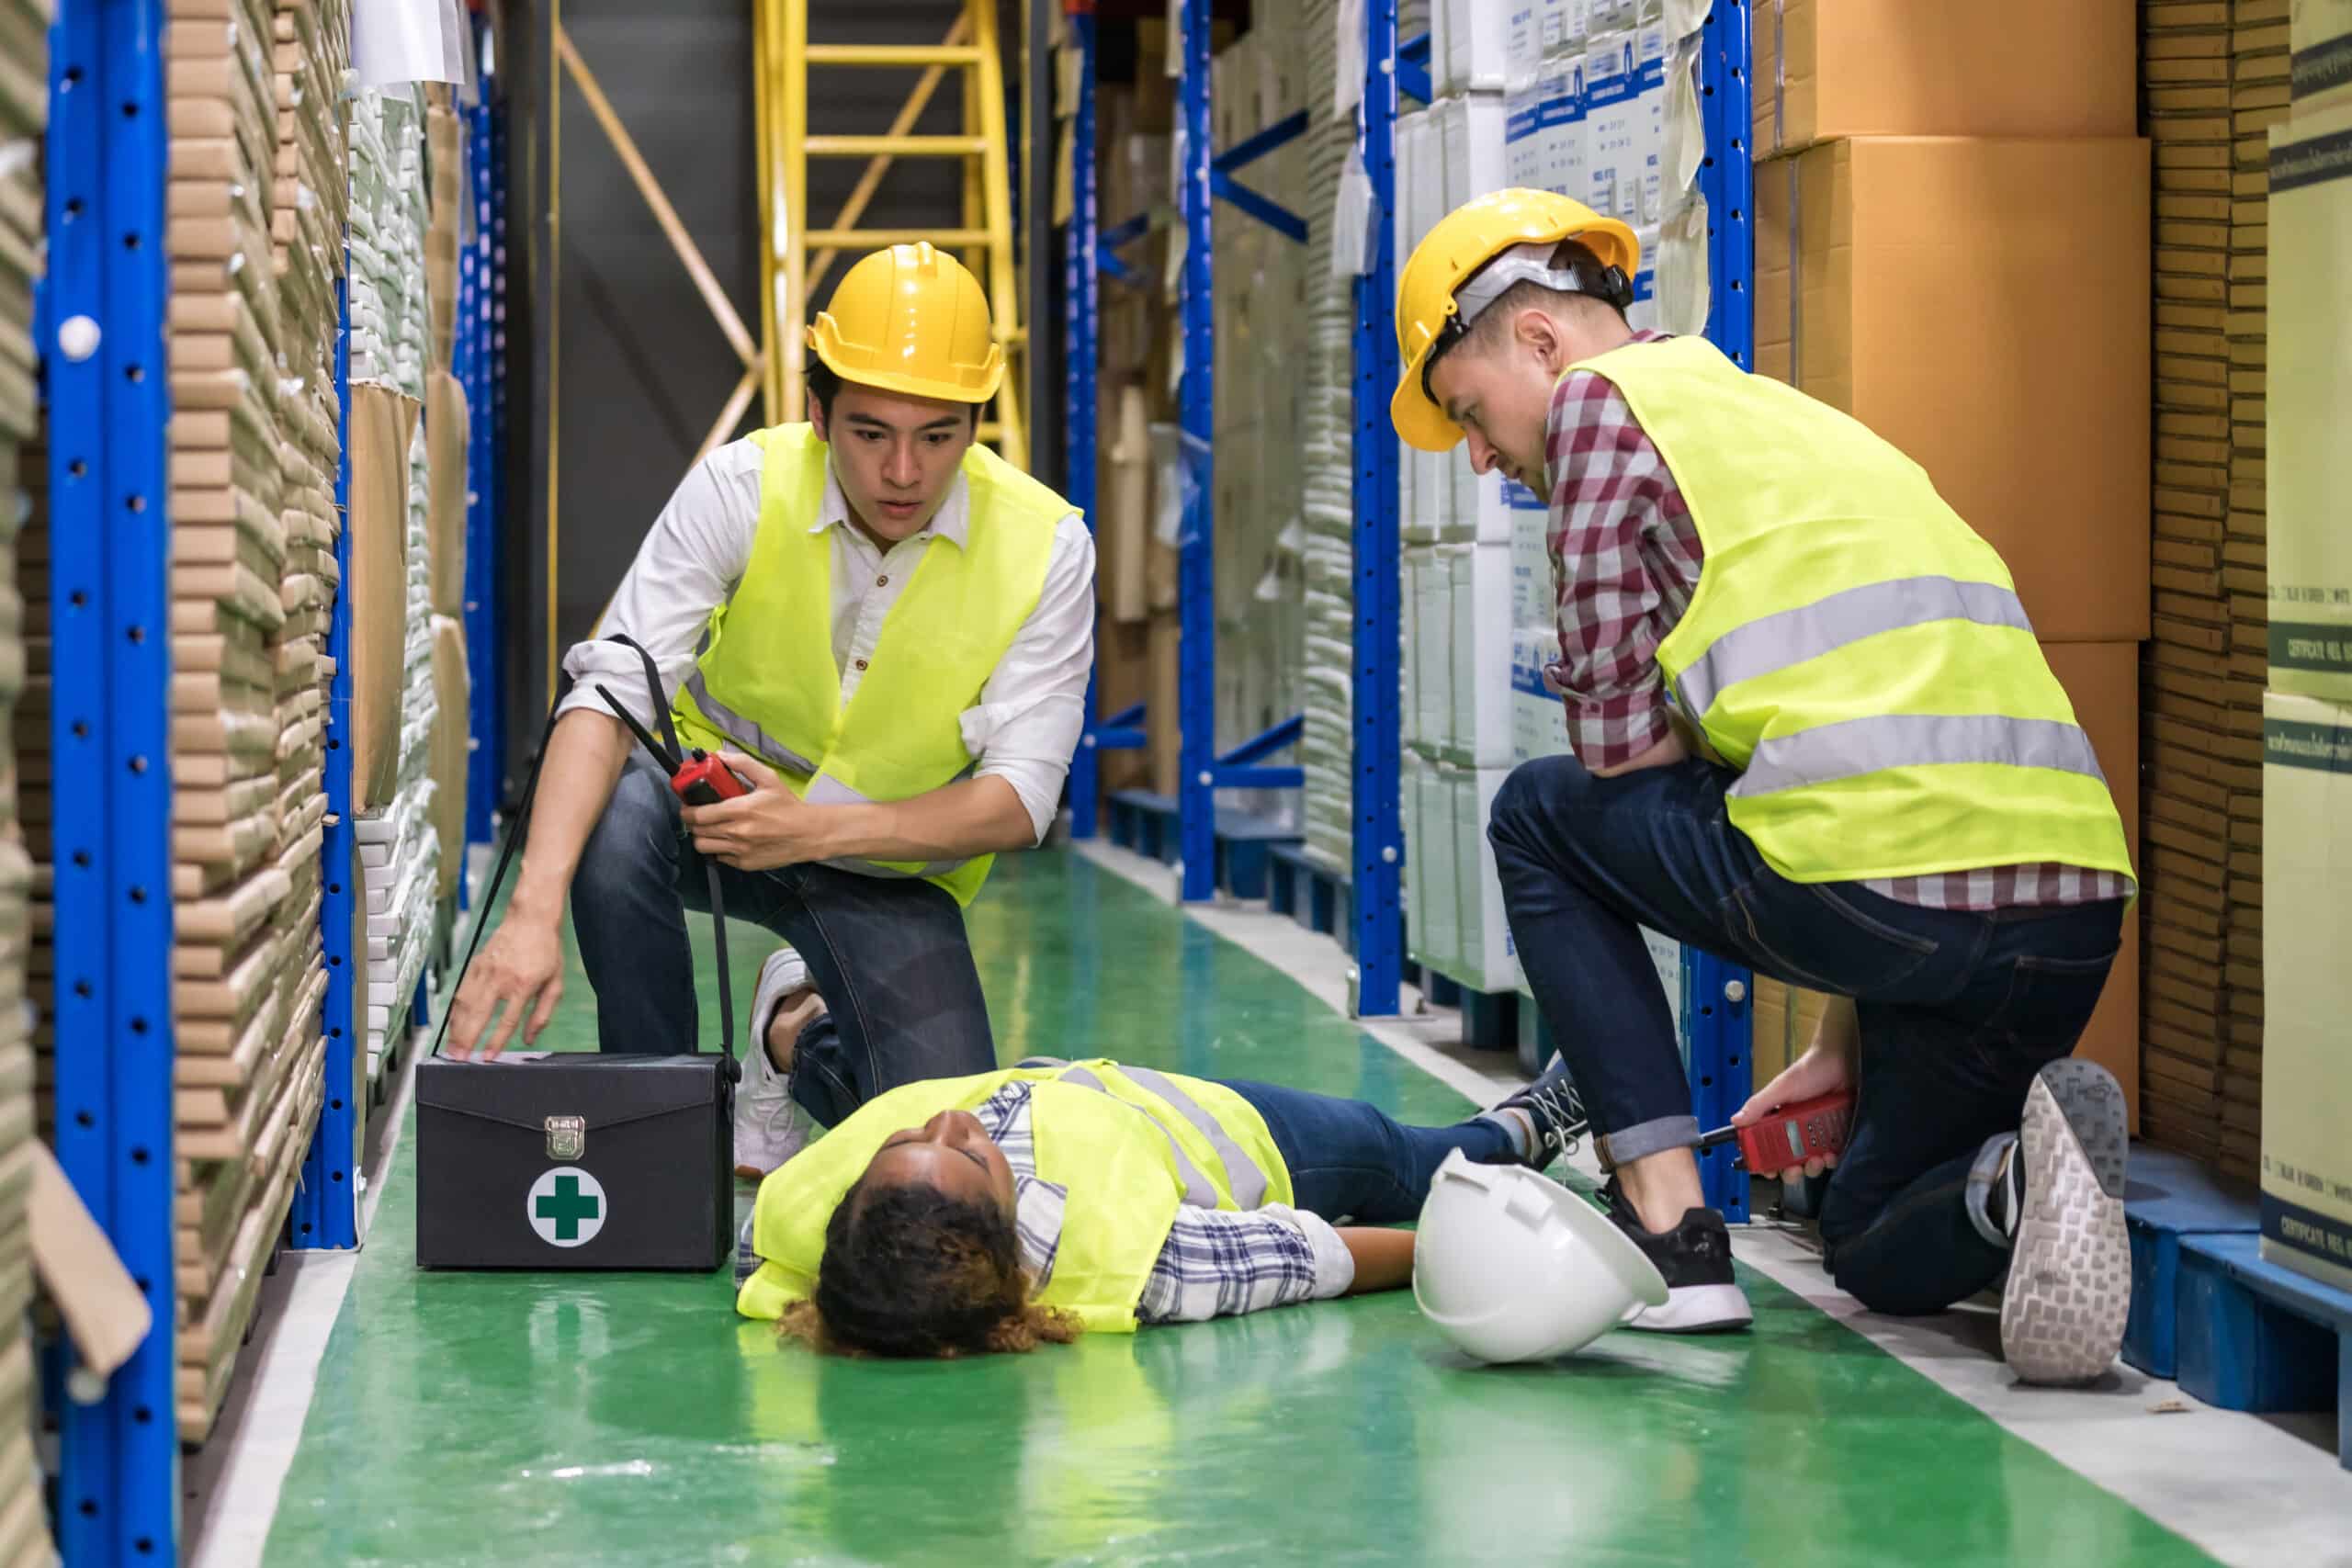 Warehouse worker first aid after accident.